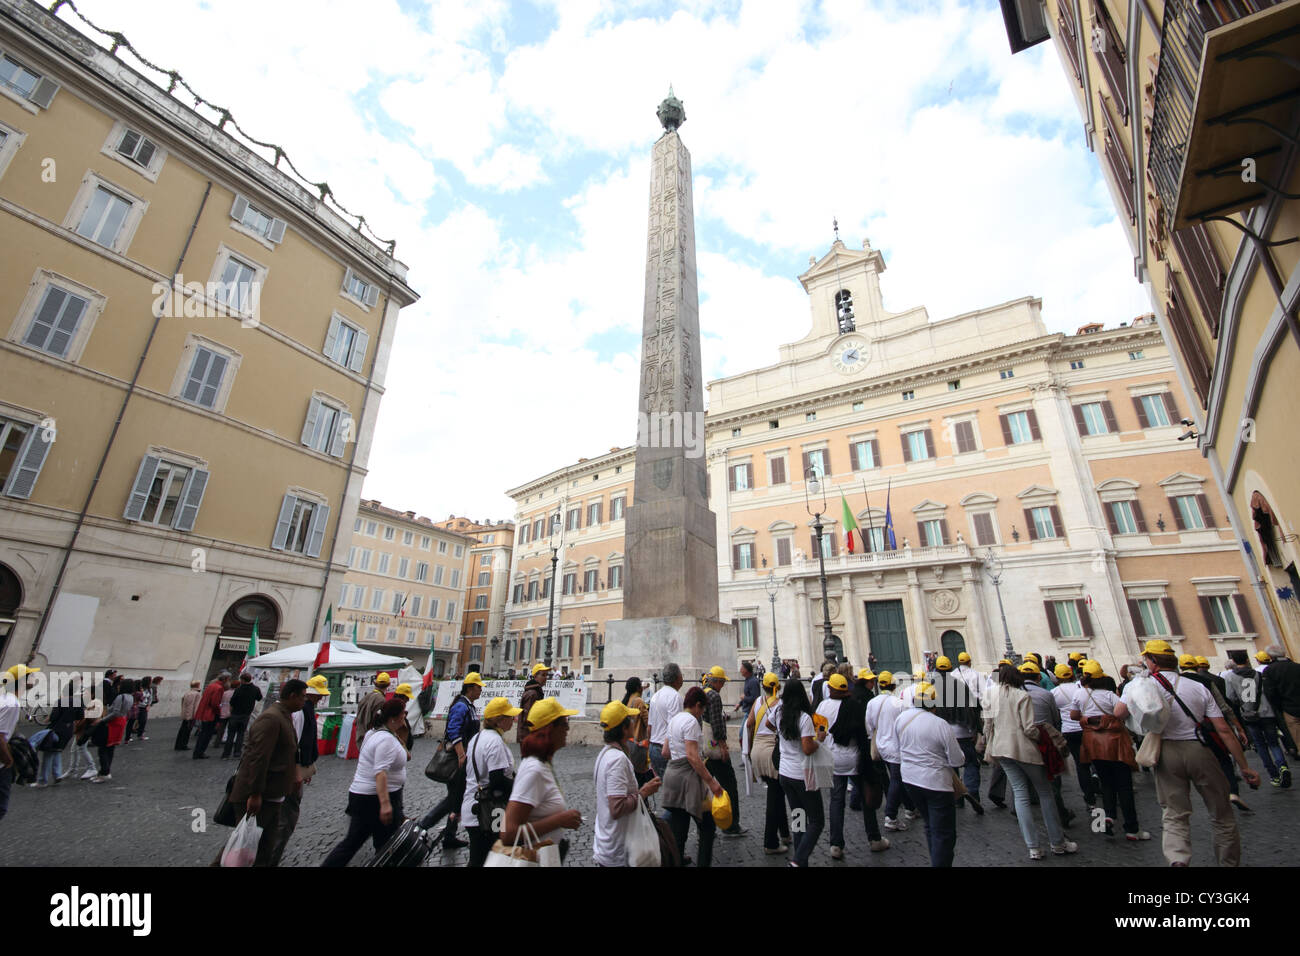 a stunning shot of the famous Obelisk of Piazza Montecitorio Roma, Rome, travel, Italy's capital, photoarkive Stock Photo